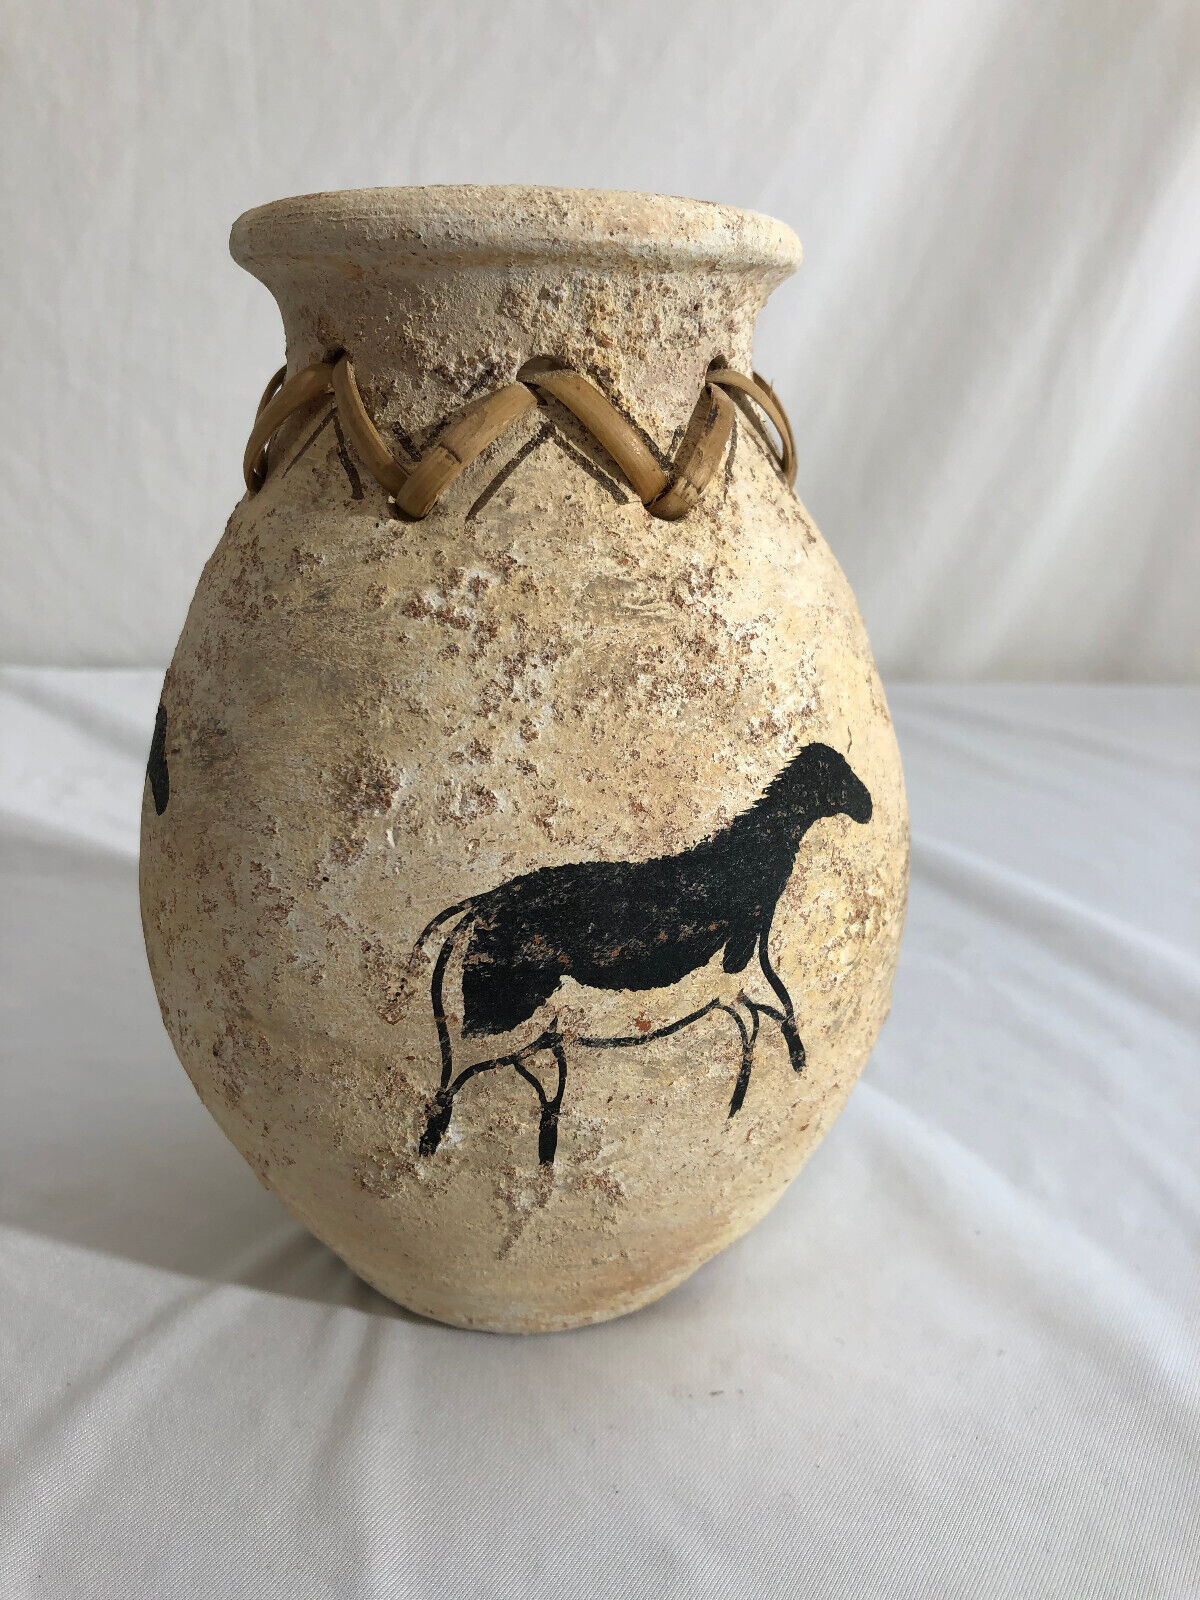 Ceramic Native American Style Vase with Horse Designs - 7 and 1/2 Inches Tall